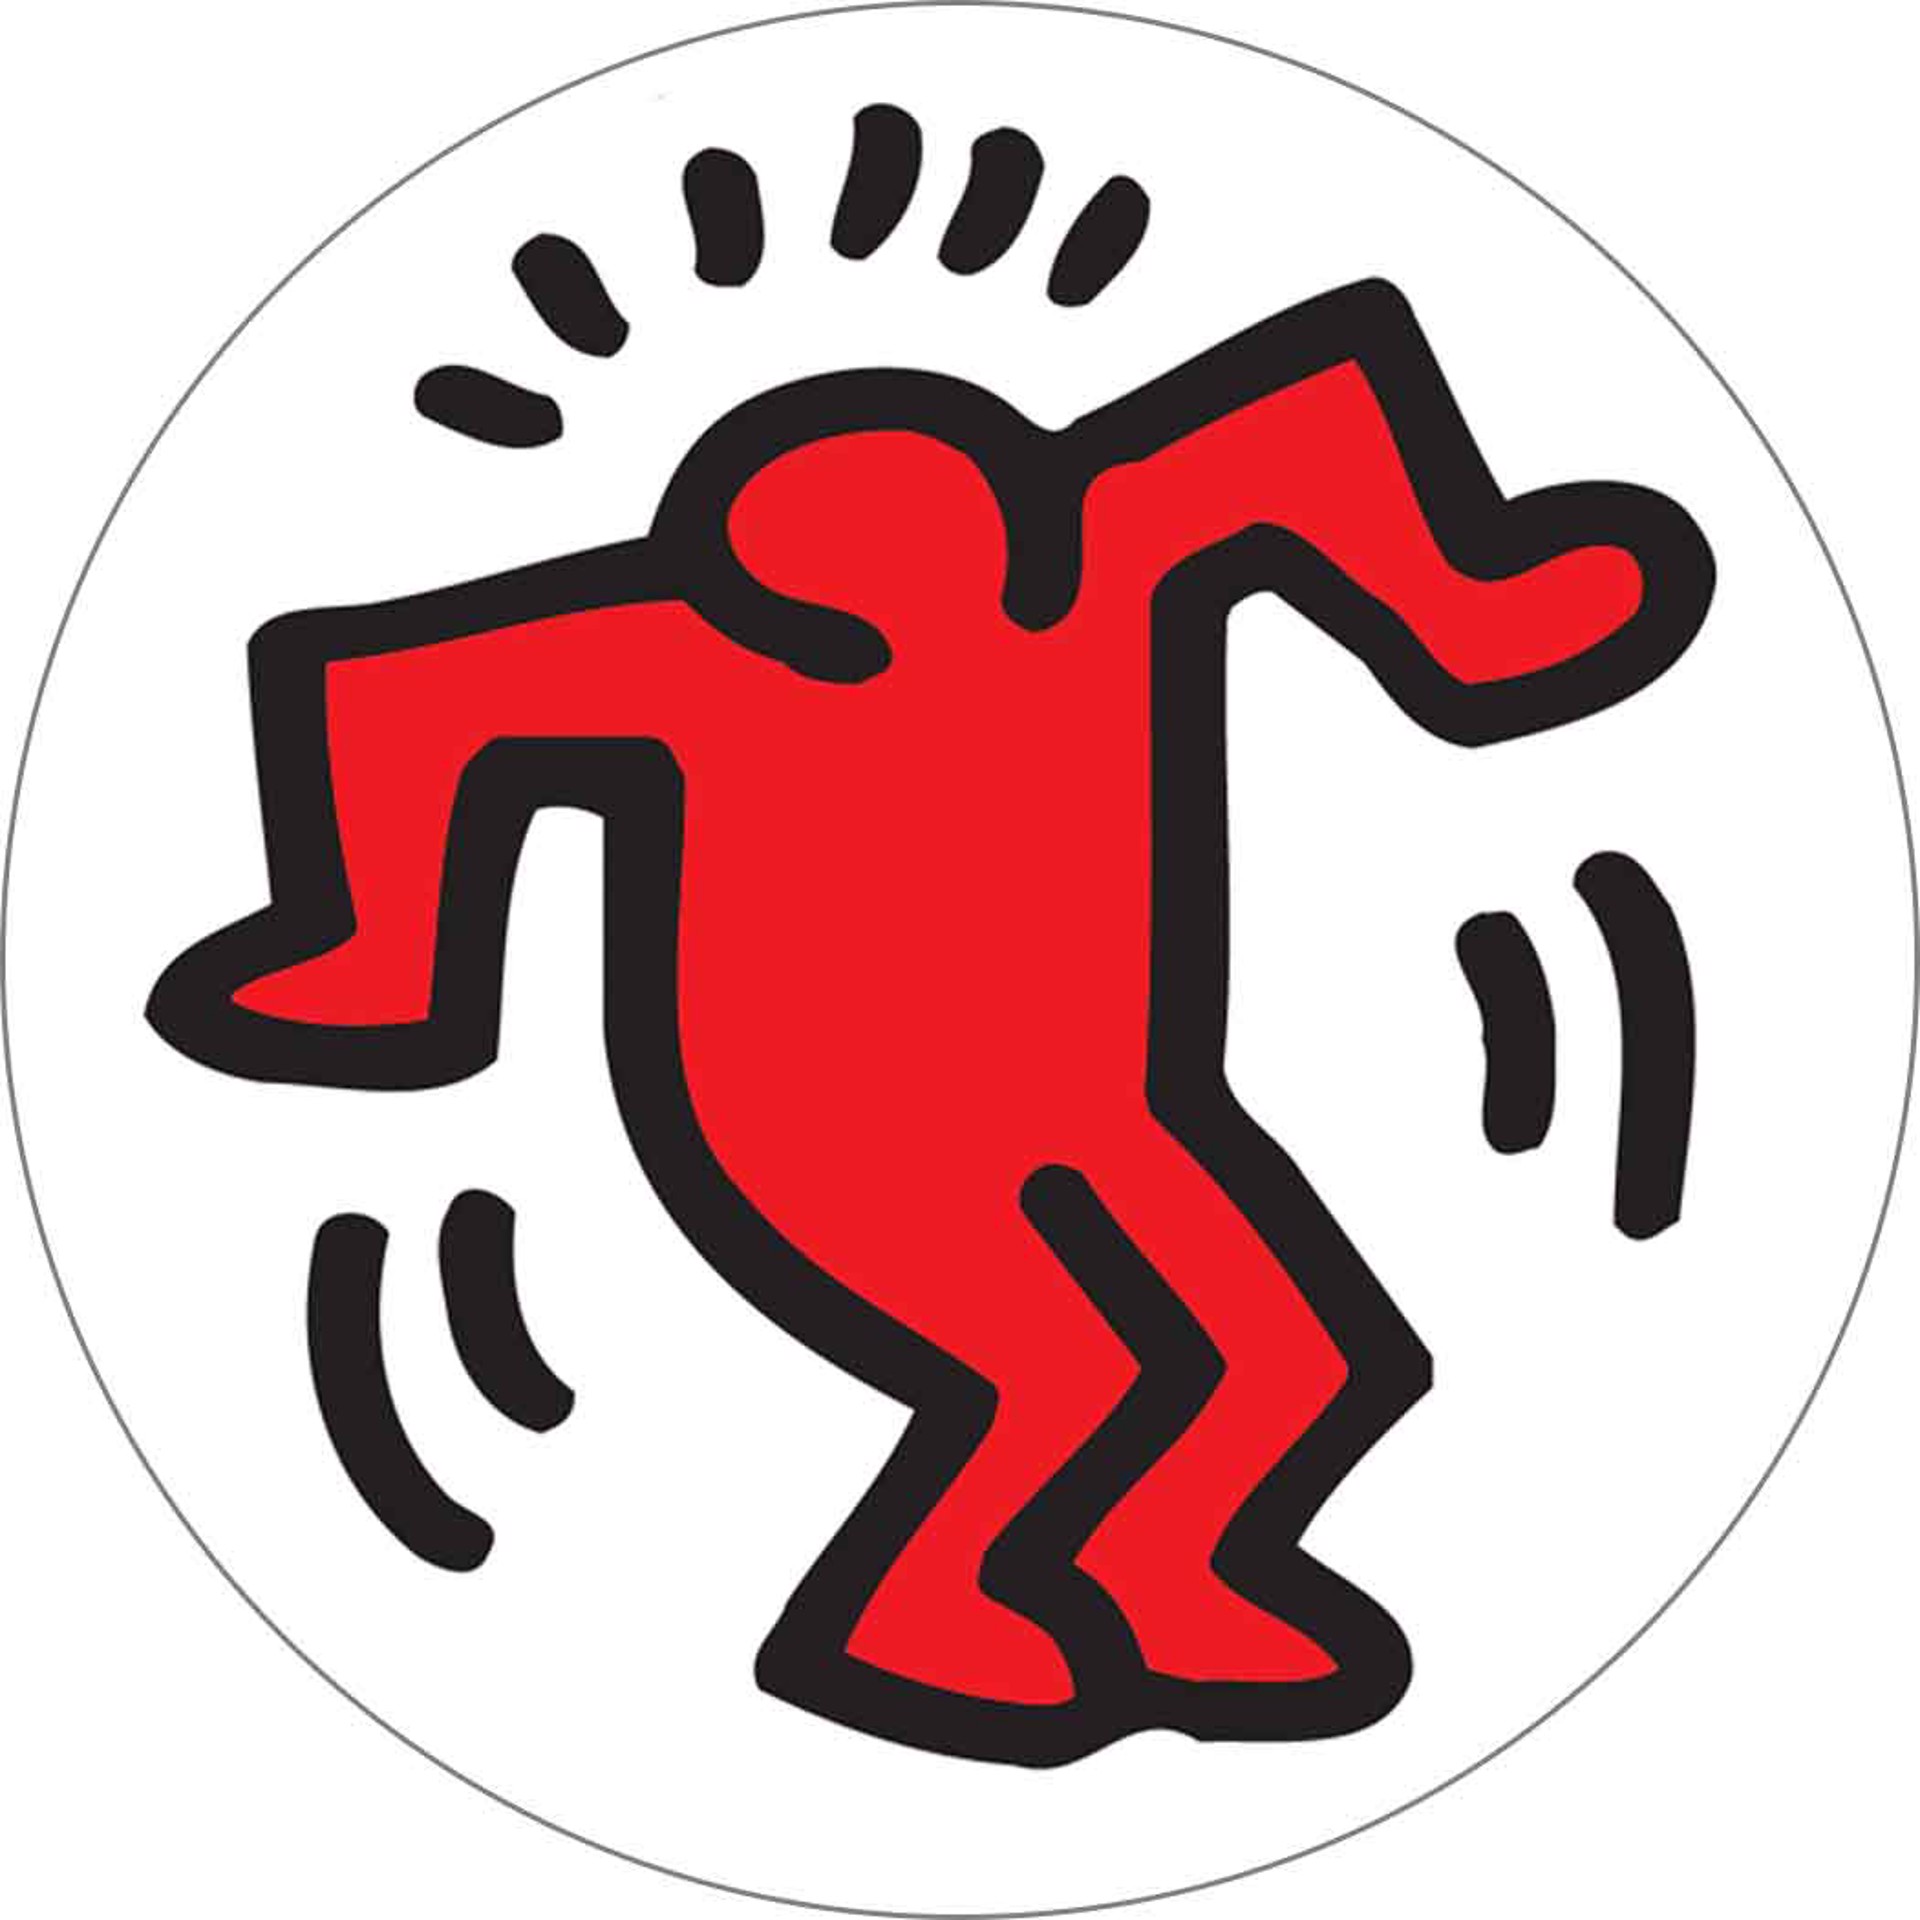 Dancing Figure Round Magnet by Keith Haring